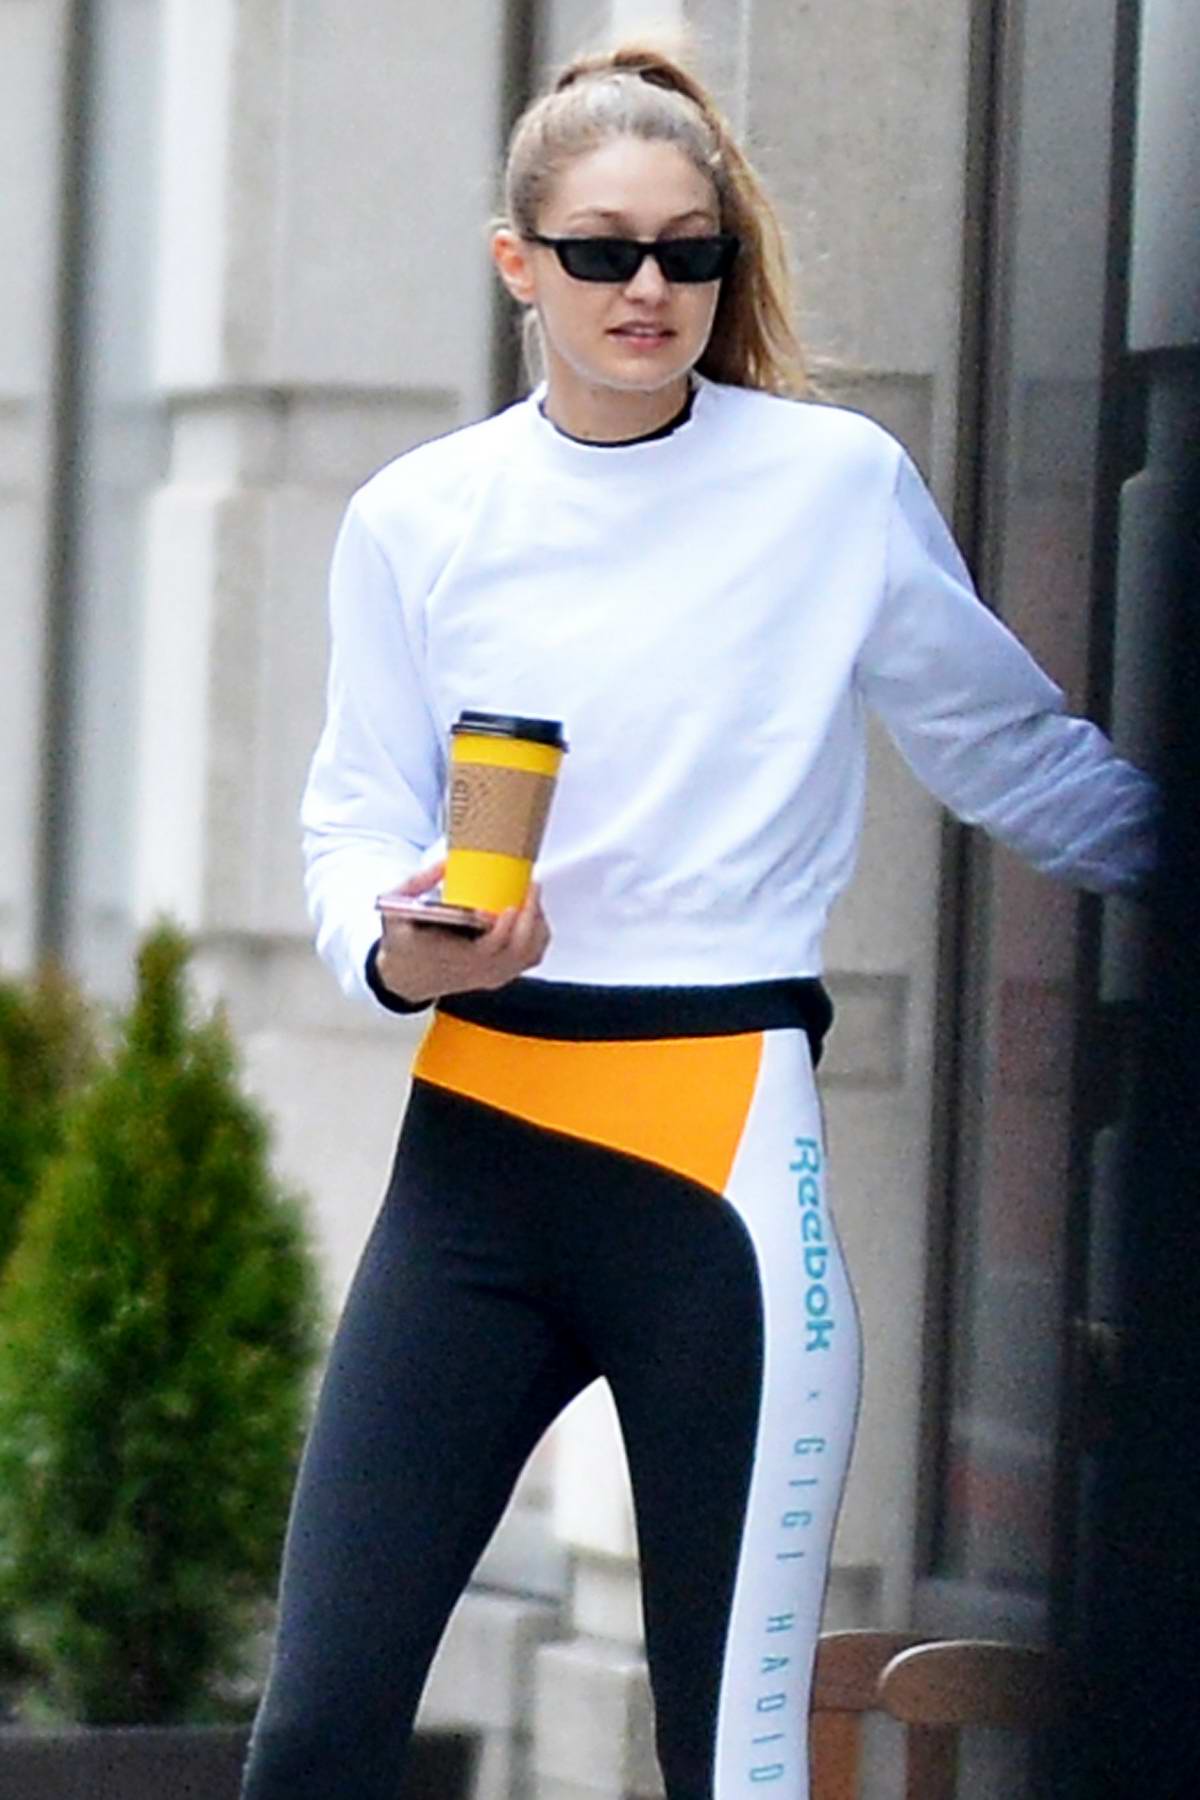 gigi hadid sports her own brand of reebok tights while exiting a